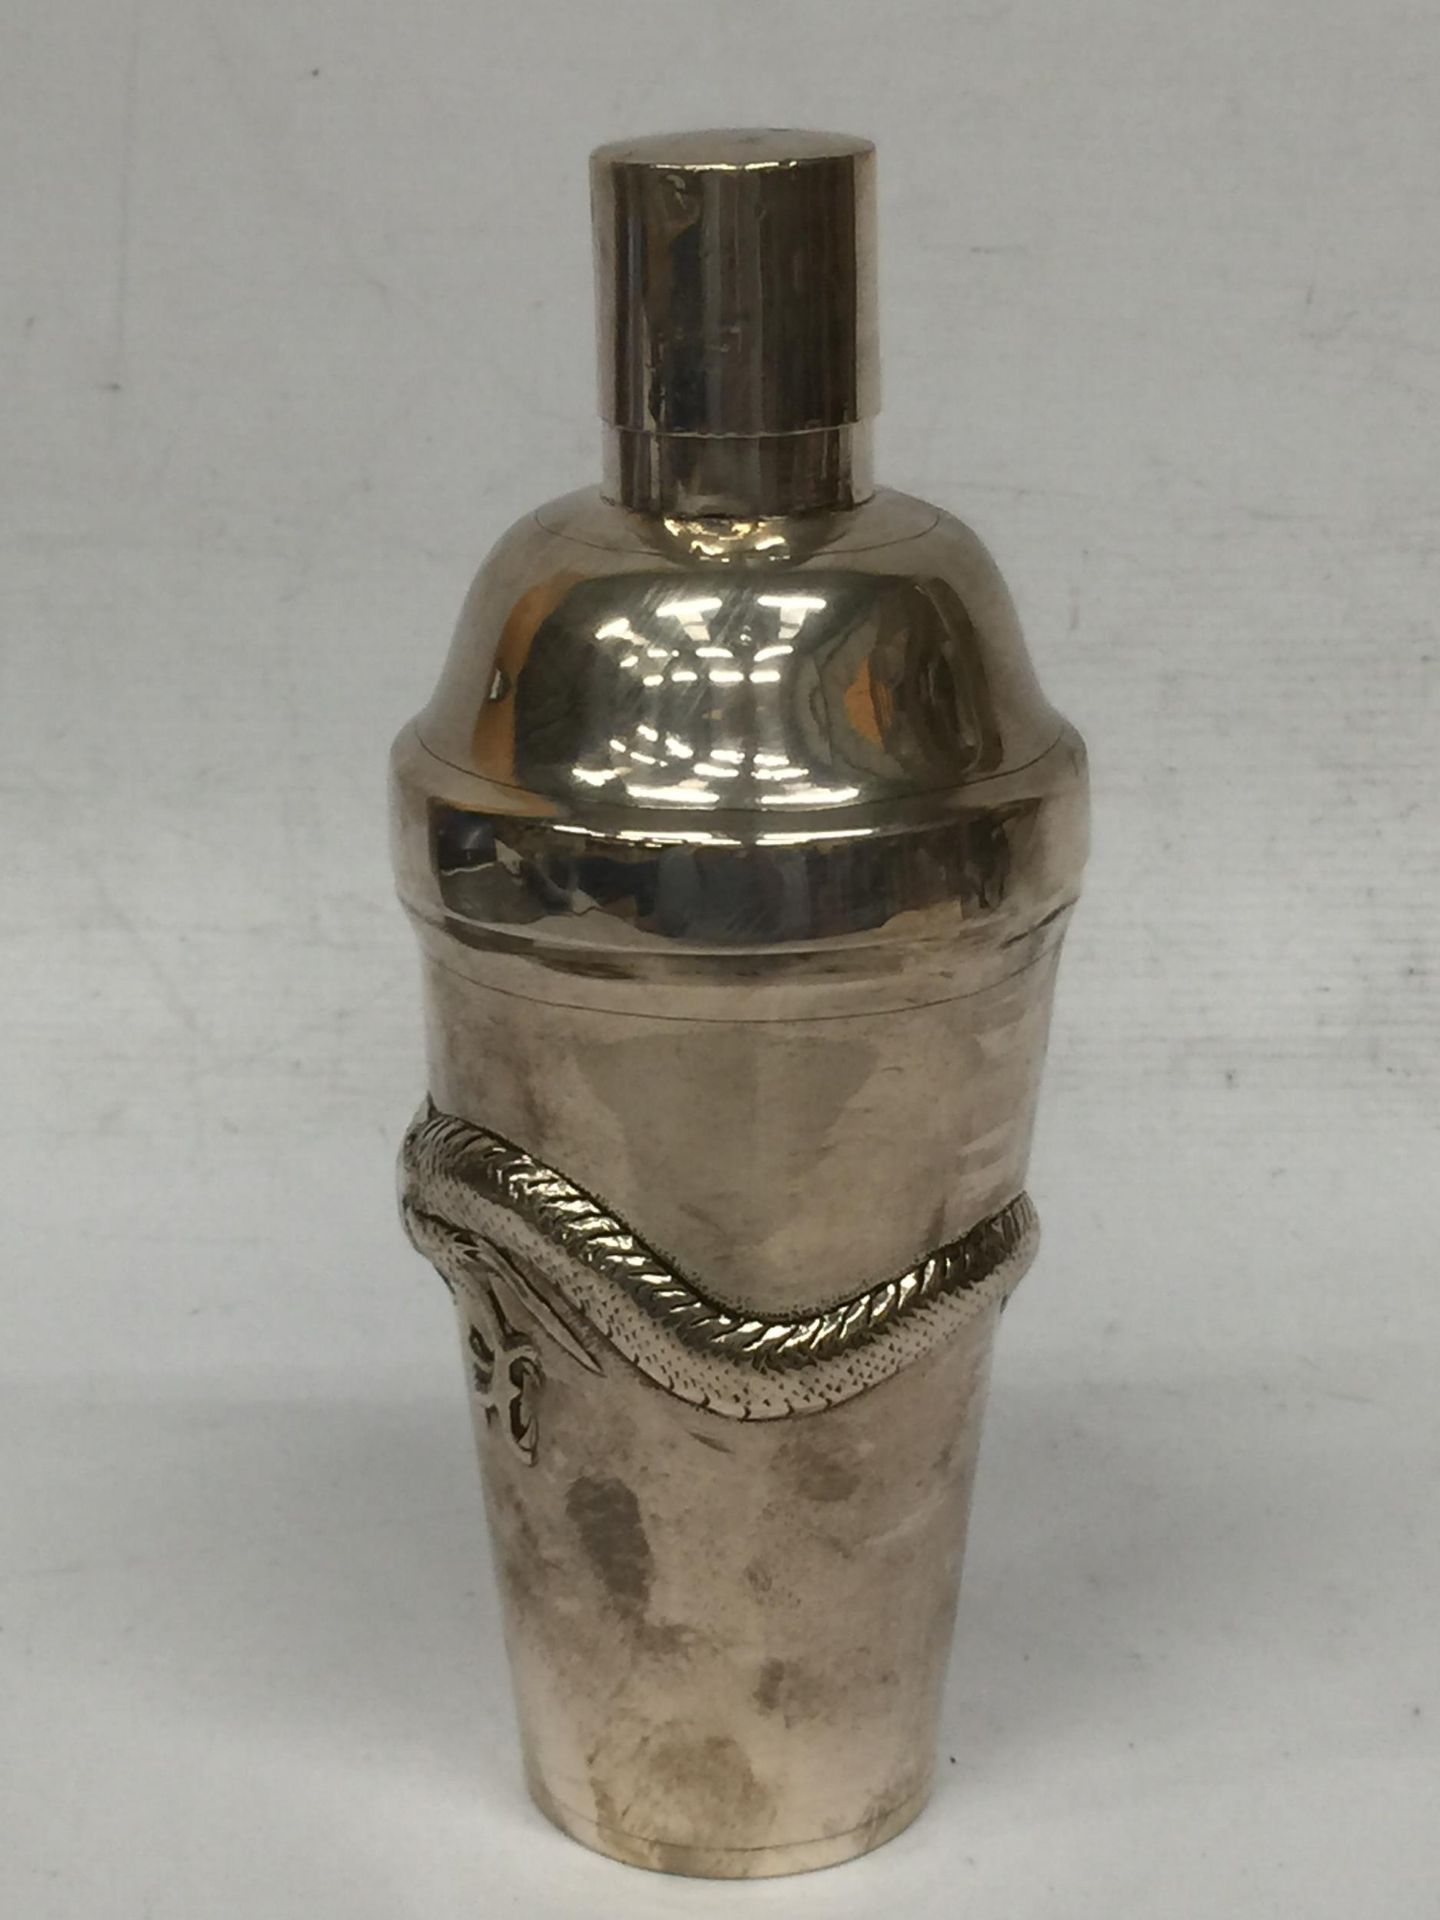 A BELIEVED SILVER CHINESE NANKING COCKTAIL SHAKER WITH DRAGON APPLIED DESIGN - Image 3 of 5